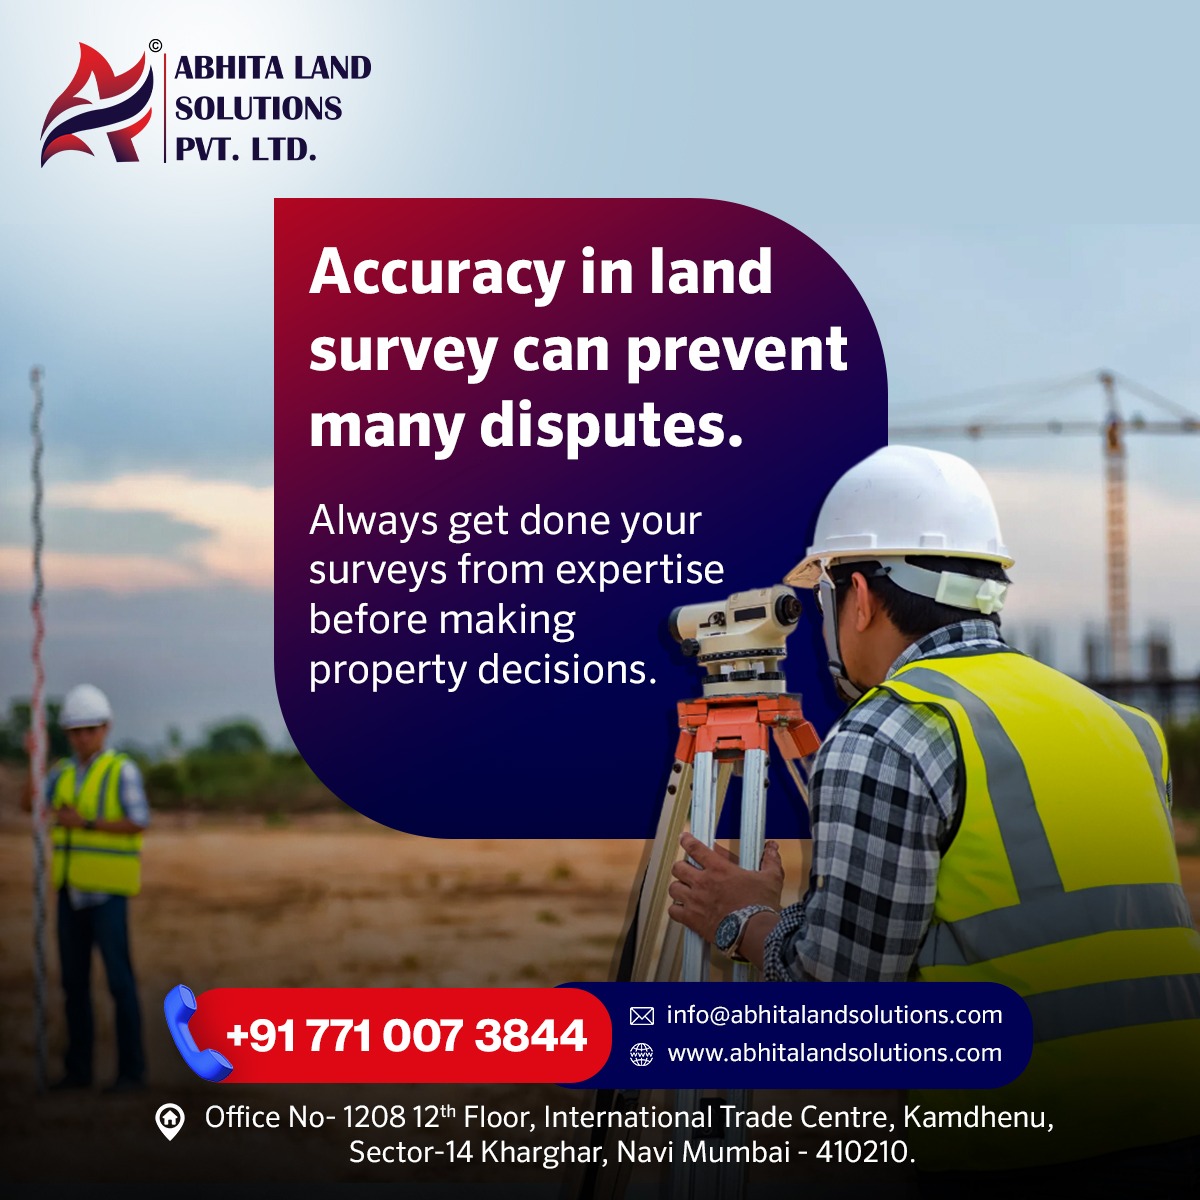 Ensure peace of mind with accurate land surveys. Trust the experts to prevent property disputes and make informed decisions.
#LandDisputes #LegalGuardians #LandMatters #LandRights #LegalAdvice #LegalServices #LegalSolutions #landsolution #landservice #abhitalandsolutions #mumbai